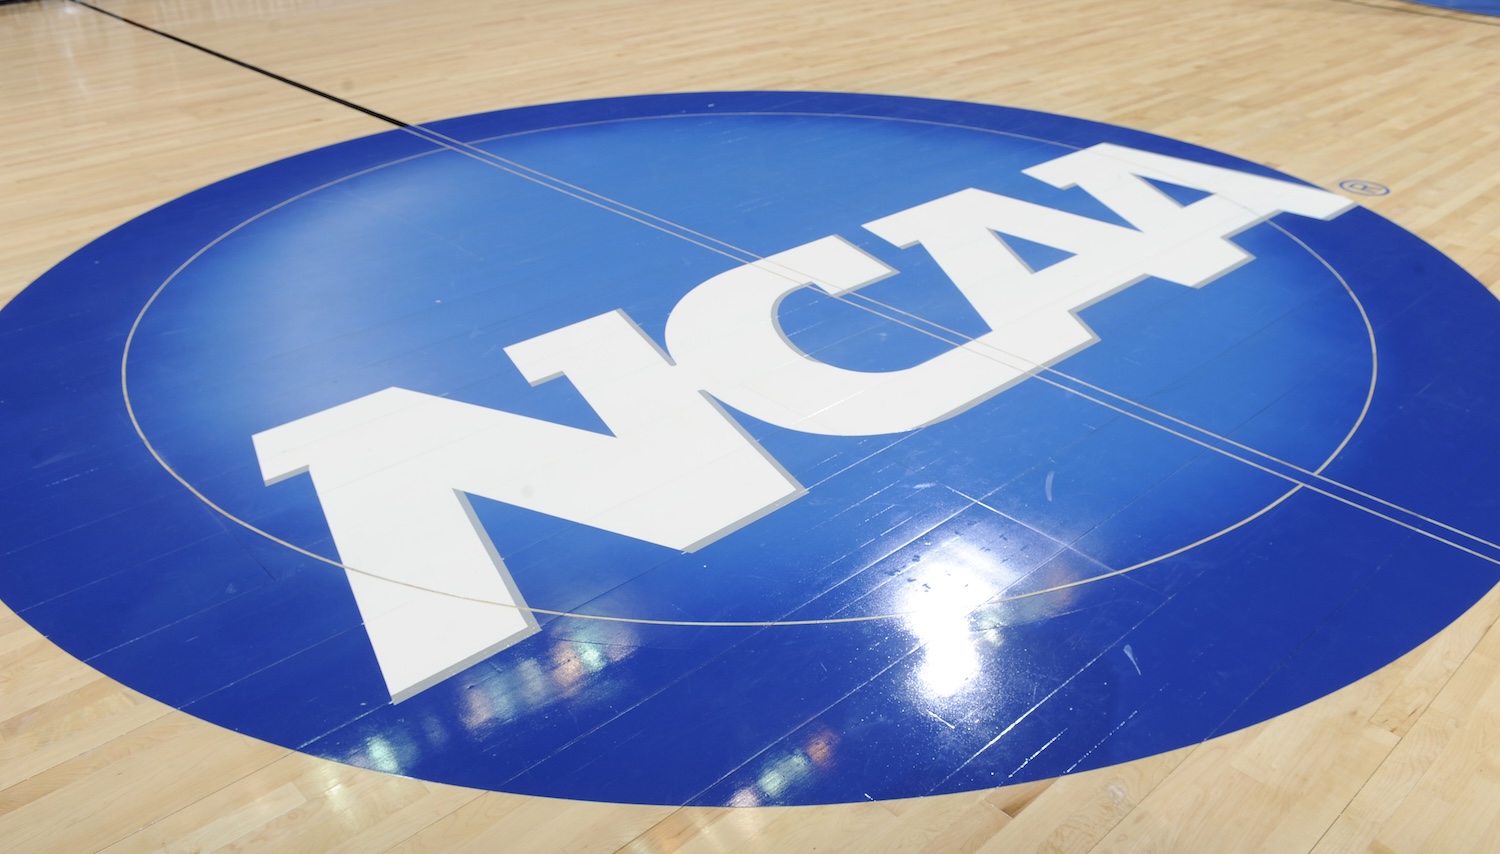 WASHINGTON, DC - MARCH 19: The NCAA logo on the basketball court during the third round of the 2011 NCAA men's basketball tournament between the Butler Bulldogs and the Pittsburgh Panthers at the Verizon Center on March 19, 2011 in Washington, DC. The Bulldogs won 71-70. (Photo by Mitchell Layton/Getty Images)